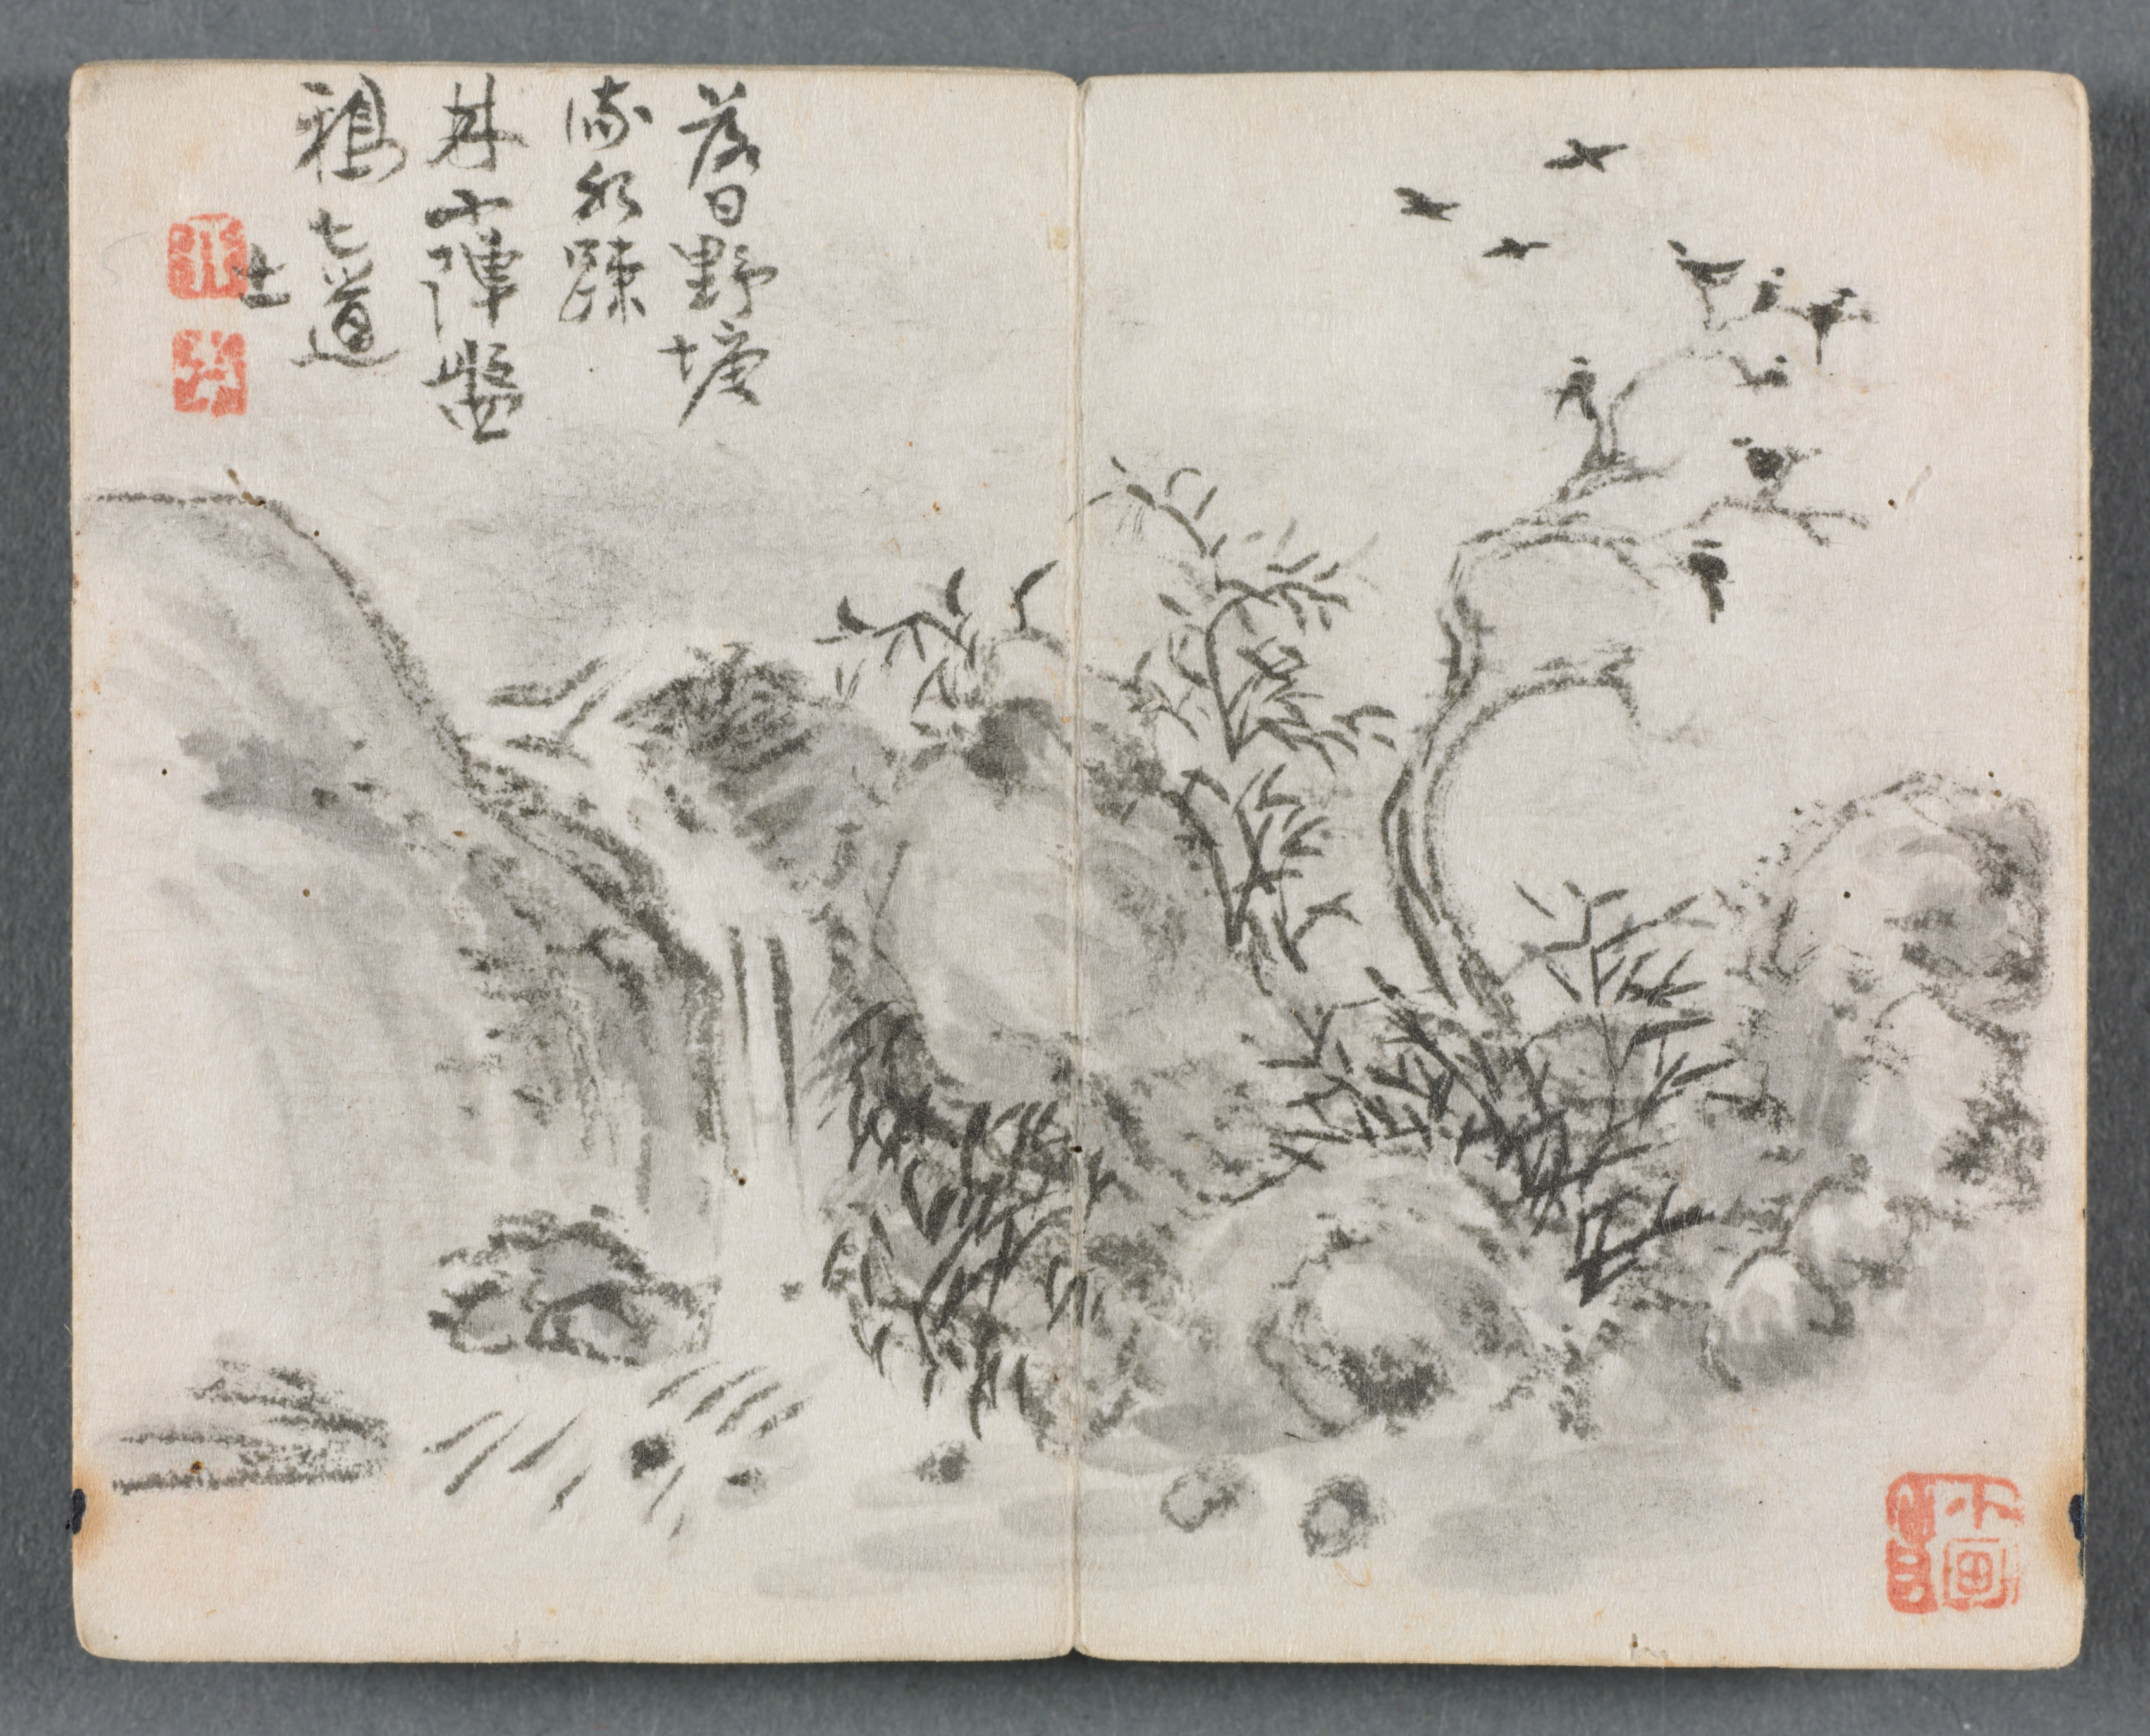 Miniature Album with Figures and Landscape (Waterfall Landscape)